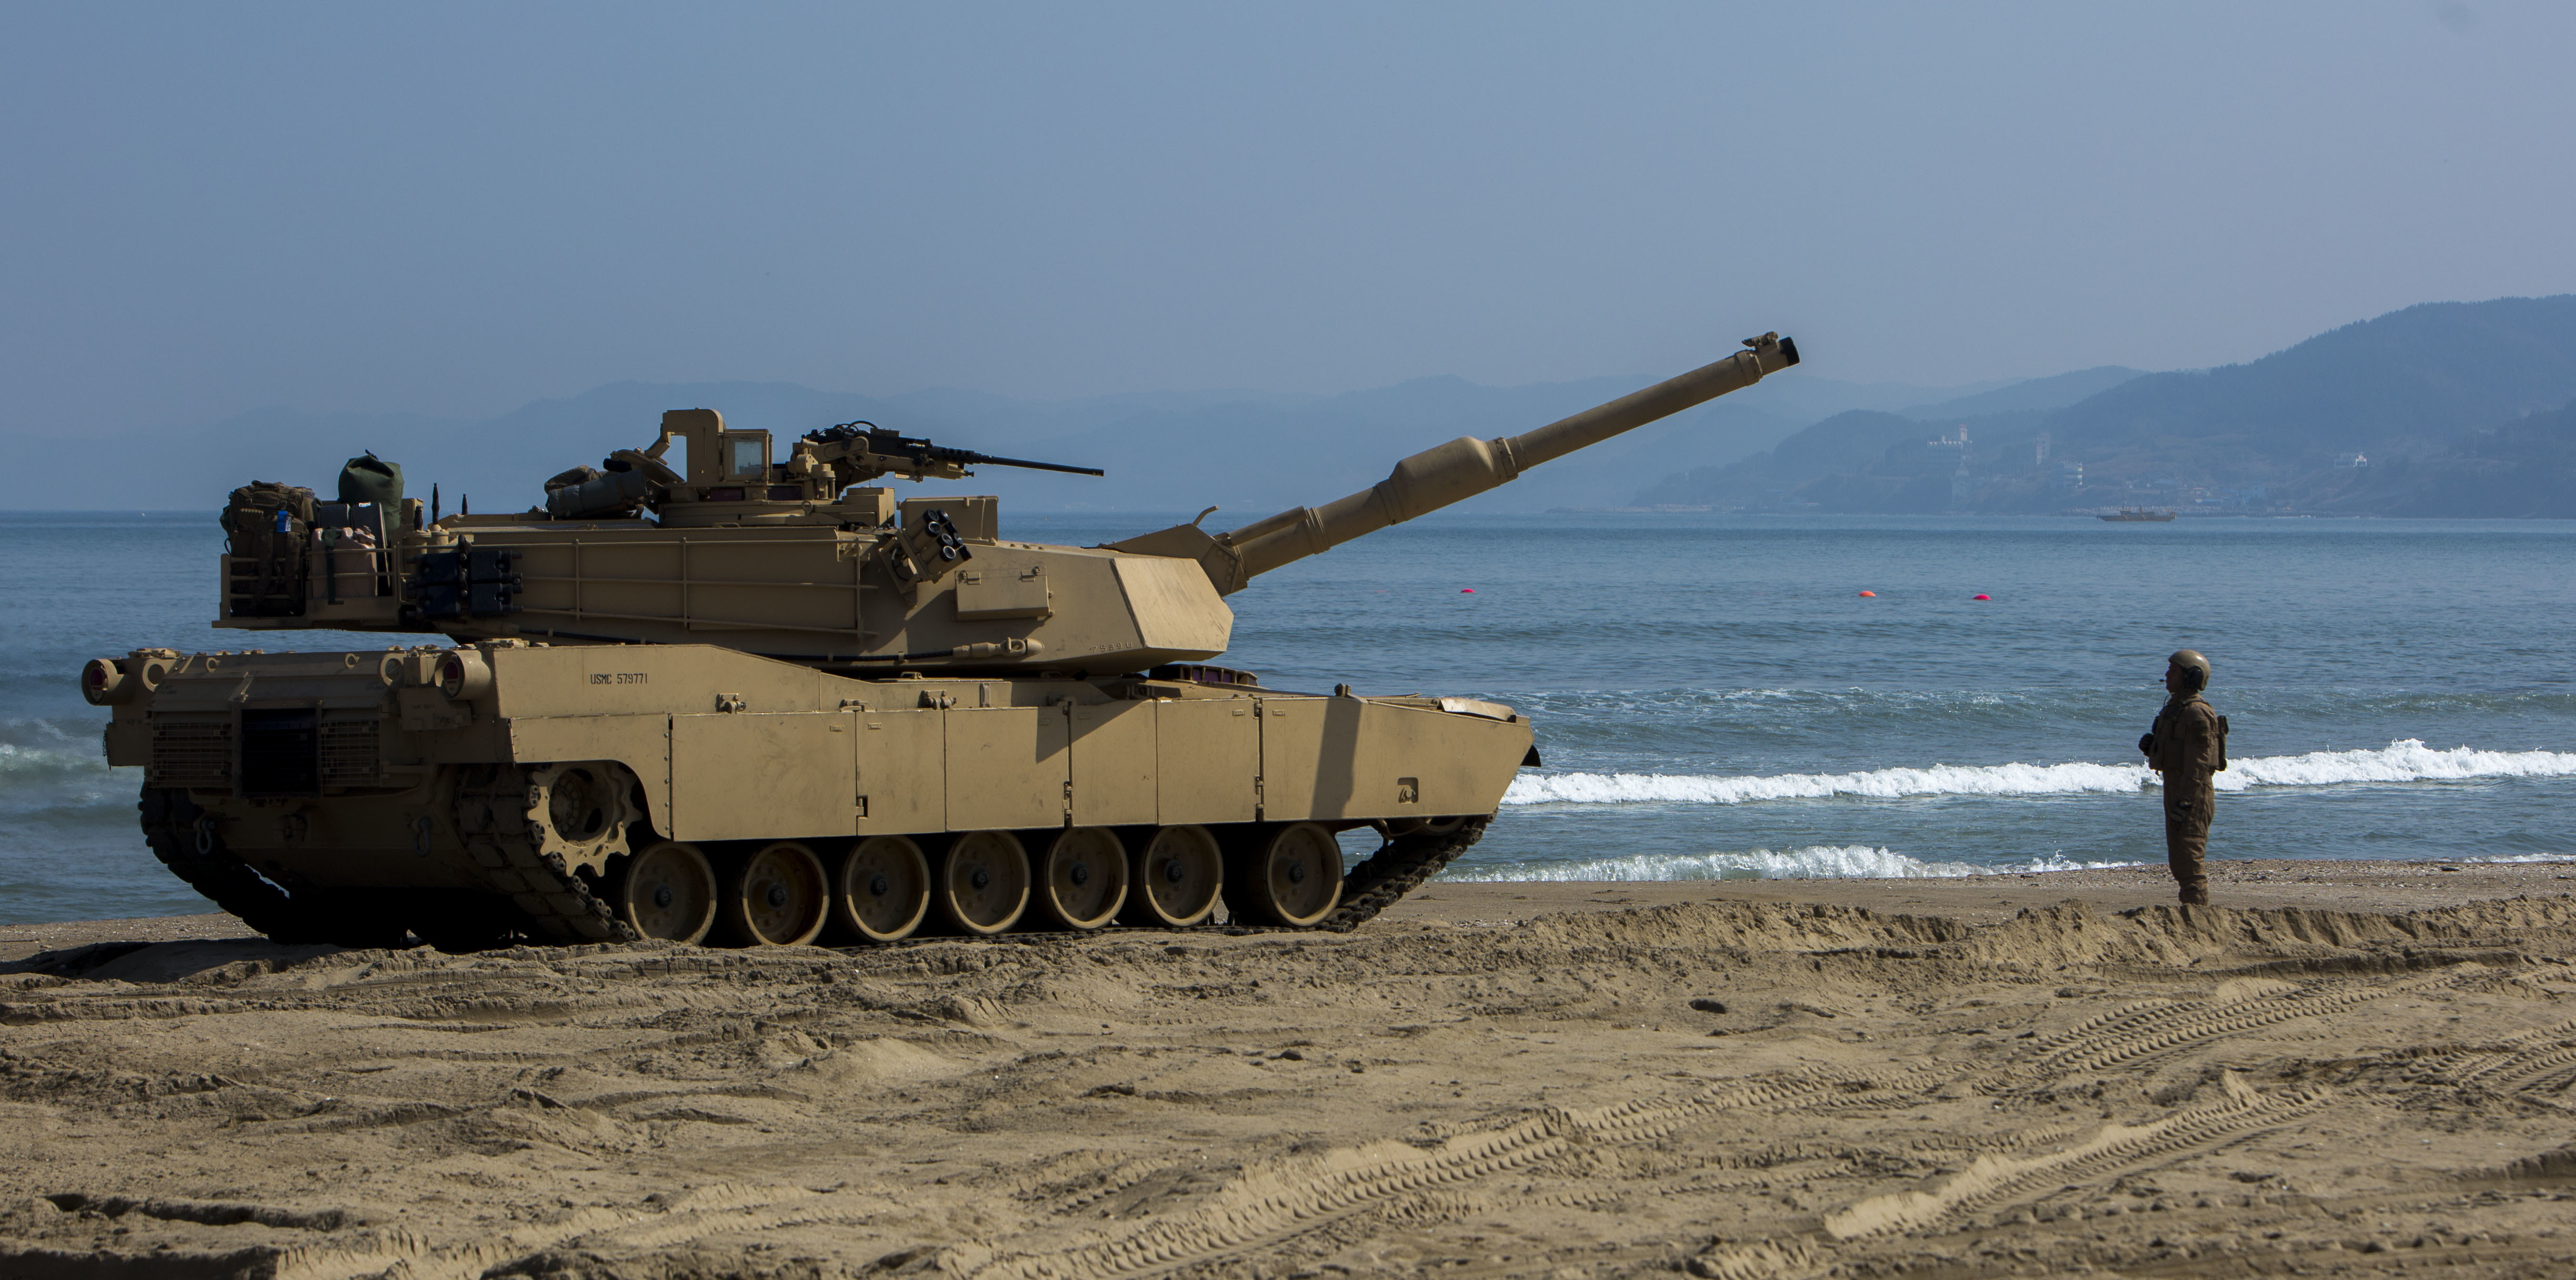 Cpl. Henry Estrada a gunner with 1st Tank Battalion from Lewisville, Texas, guides an M1A1 Abrams Main Battle Tank off the Landing Craft Air Cushion during rail operations at Dogu Beach, Republic of Korea, on March 15, 2016. US Marine Corps Photo